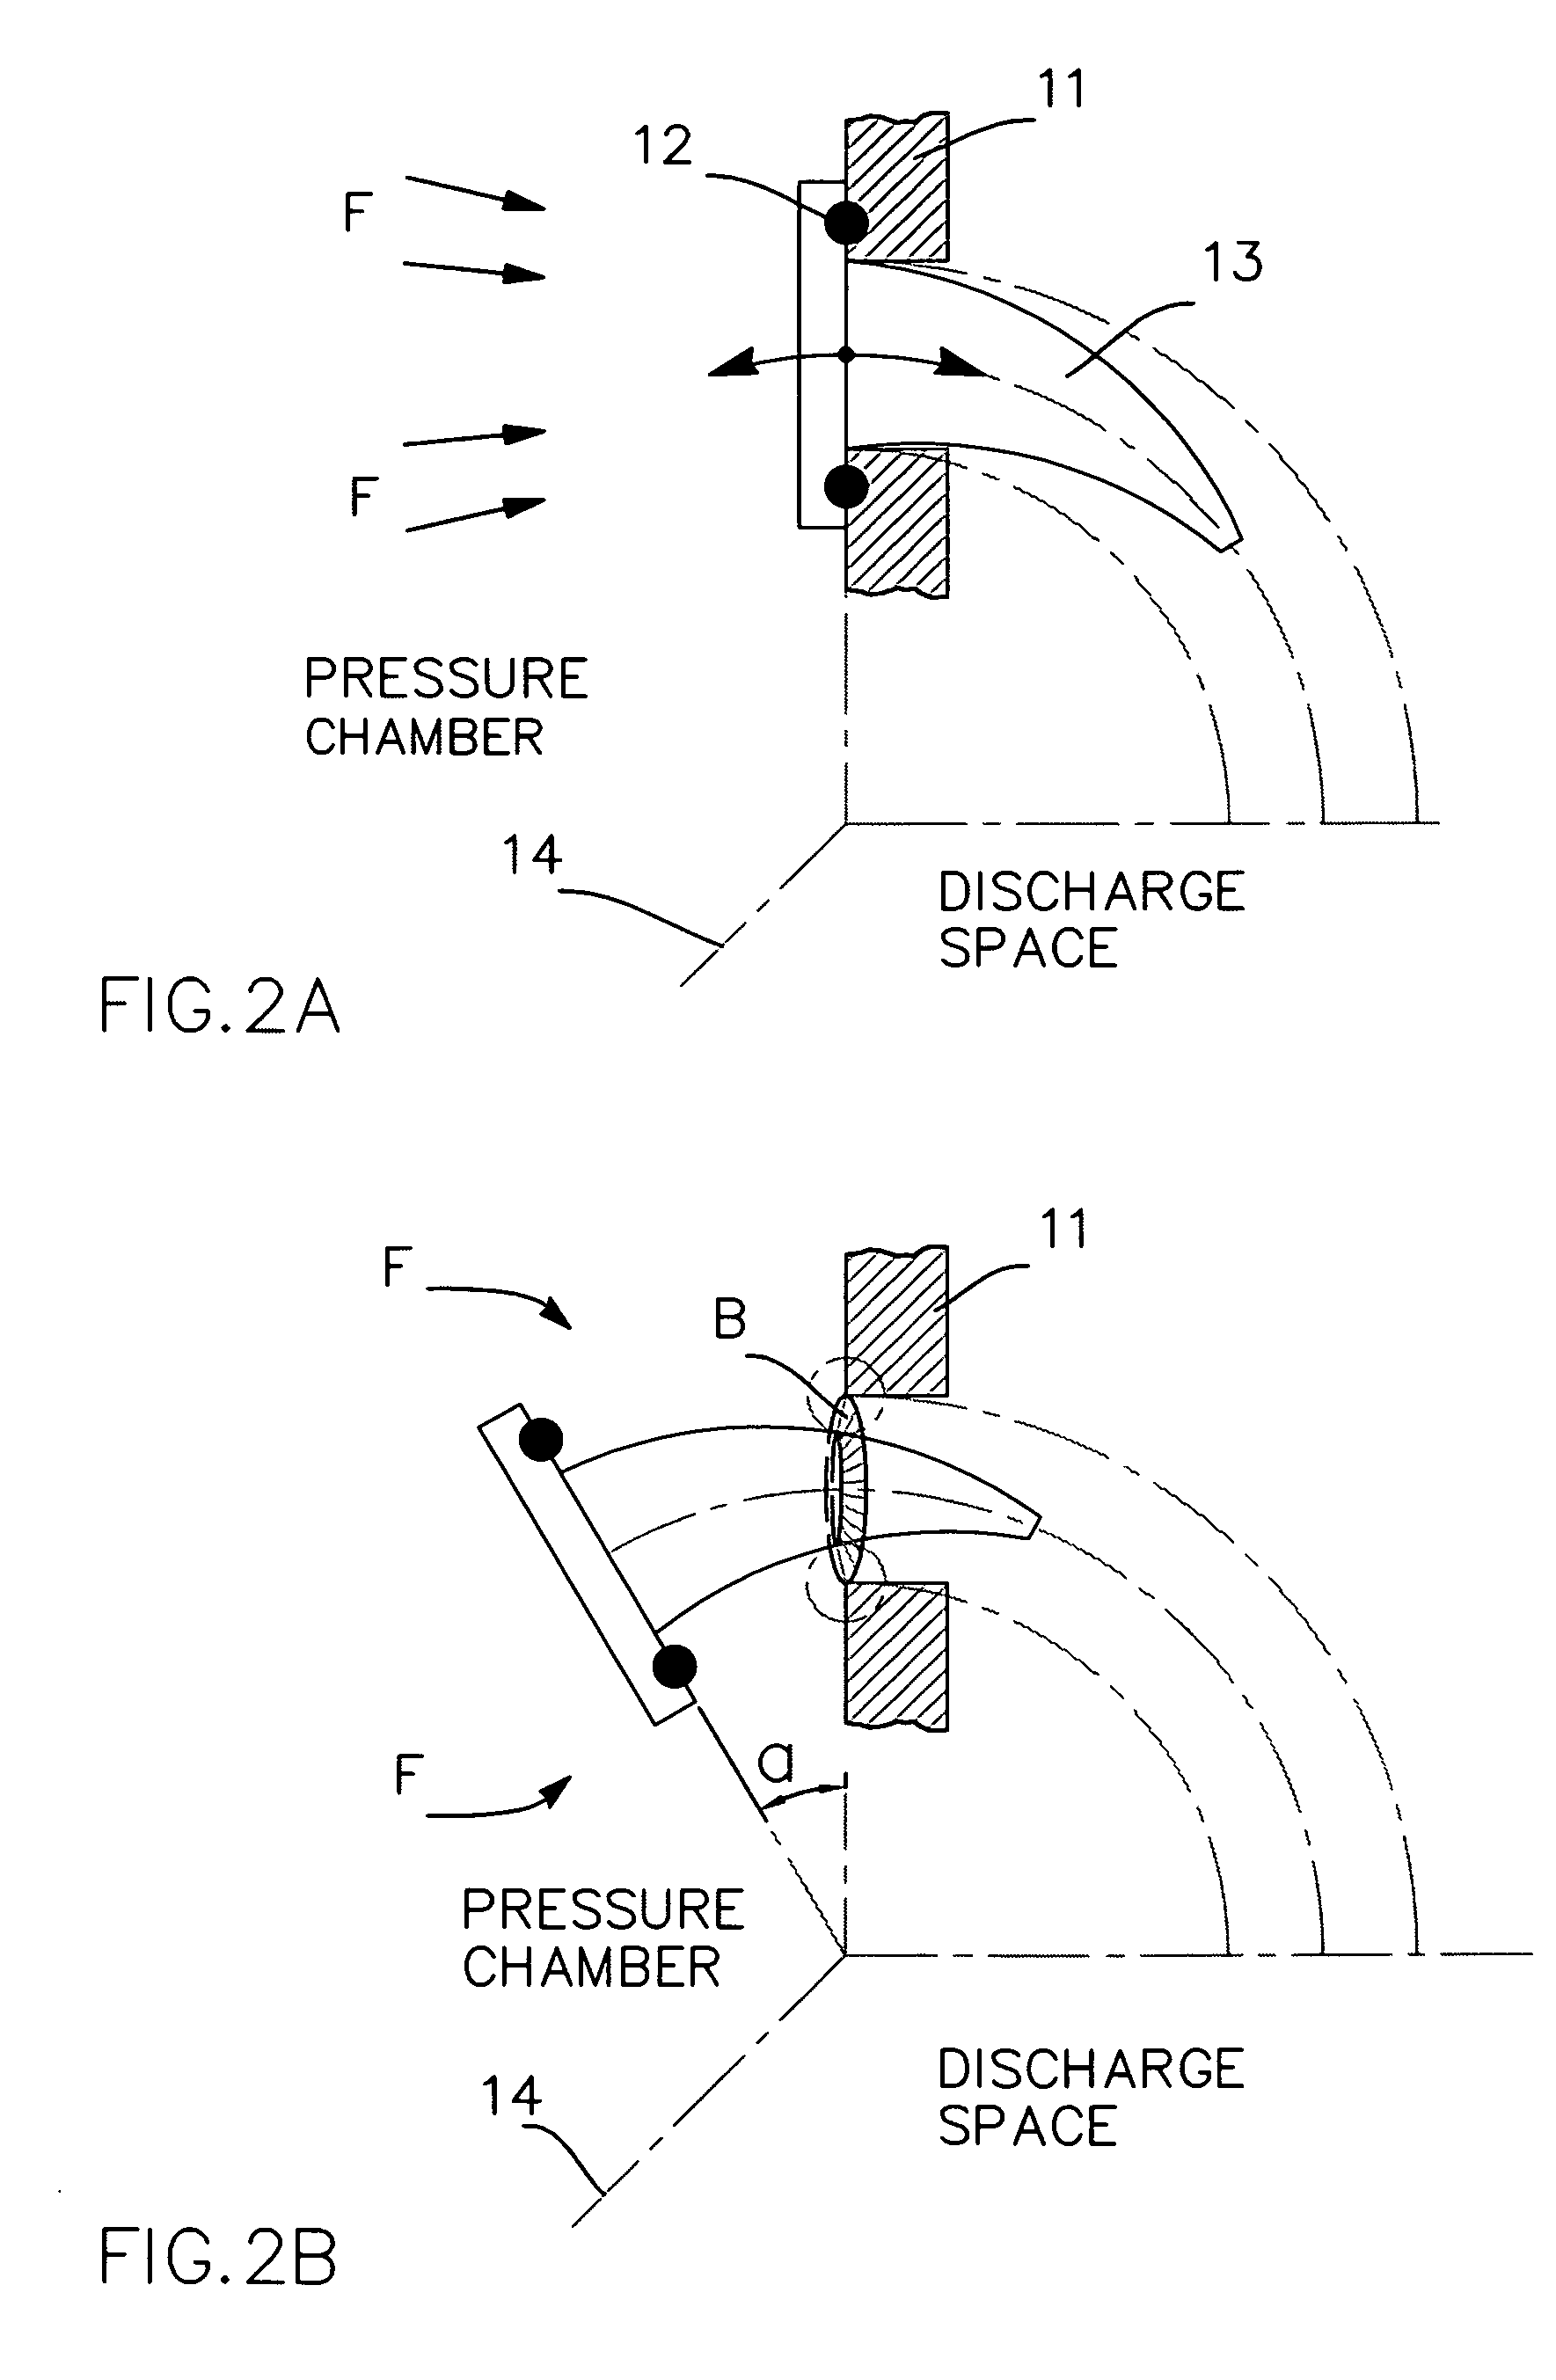 Tapered toroidal flow control valve and fuel metering device